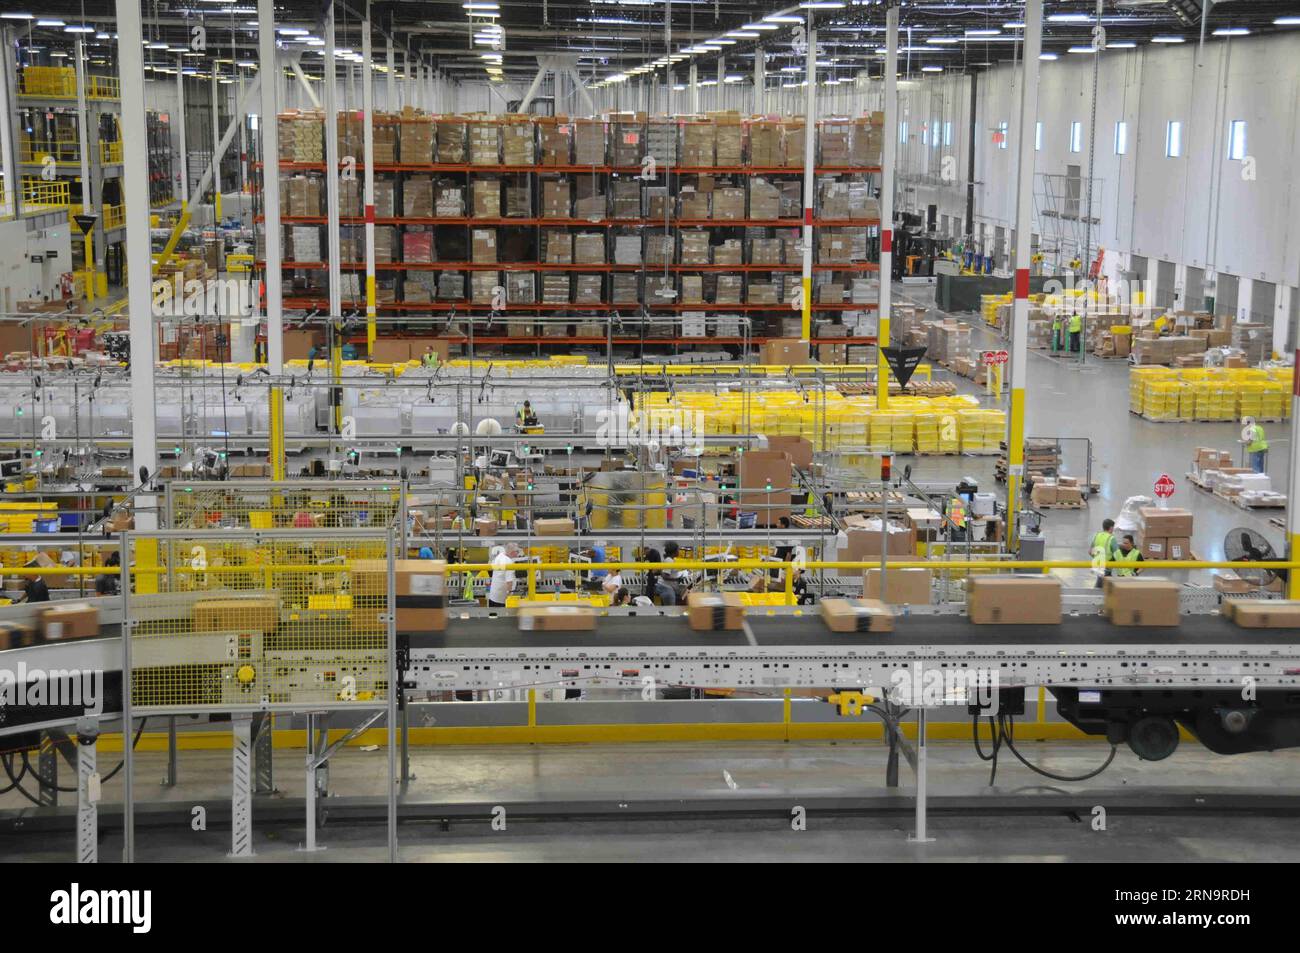 File photo taken on July 16, 2015 shows workers picking customers parcels at the Amazon Fulfillment Center in Tracy, California, the United States. Online retail giant Amazon has attracted many Chinese e-commerce shoppers to purchase foreign goods. As host of the Second World Internet Conference (WIC) that is underway in Wuzhen in east China s Zhejiang Province, China called for global Internet interconnectivity and shared governance by all. As one of the greatest inventions of the 20th century, the Internet has turned the globe into a village and profoundly changed the way people live and do Stock Photo